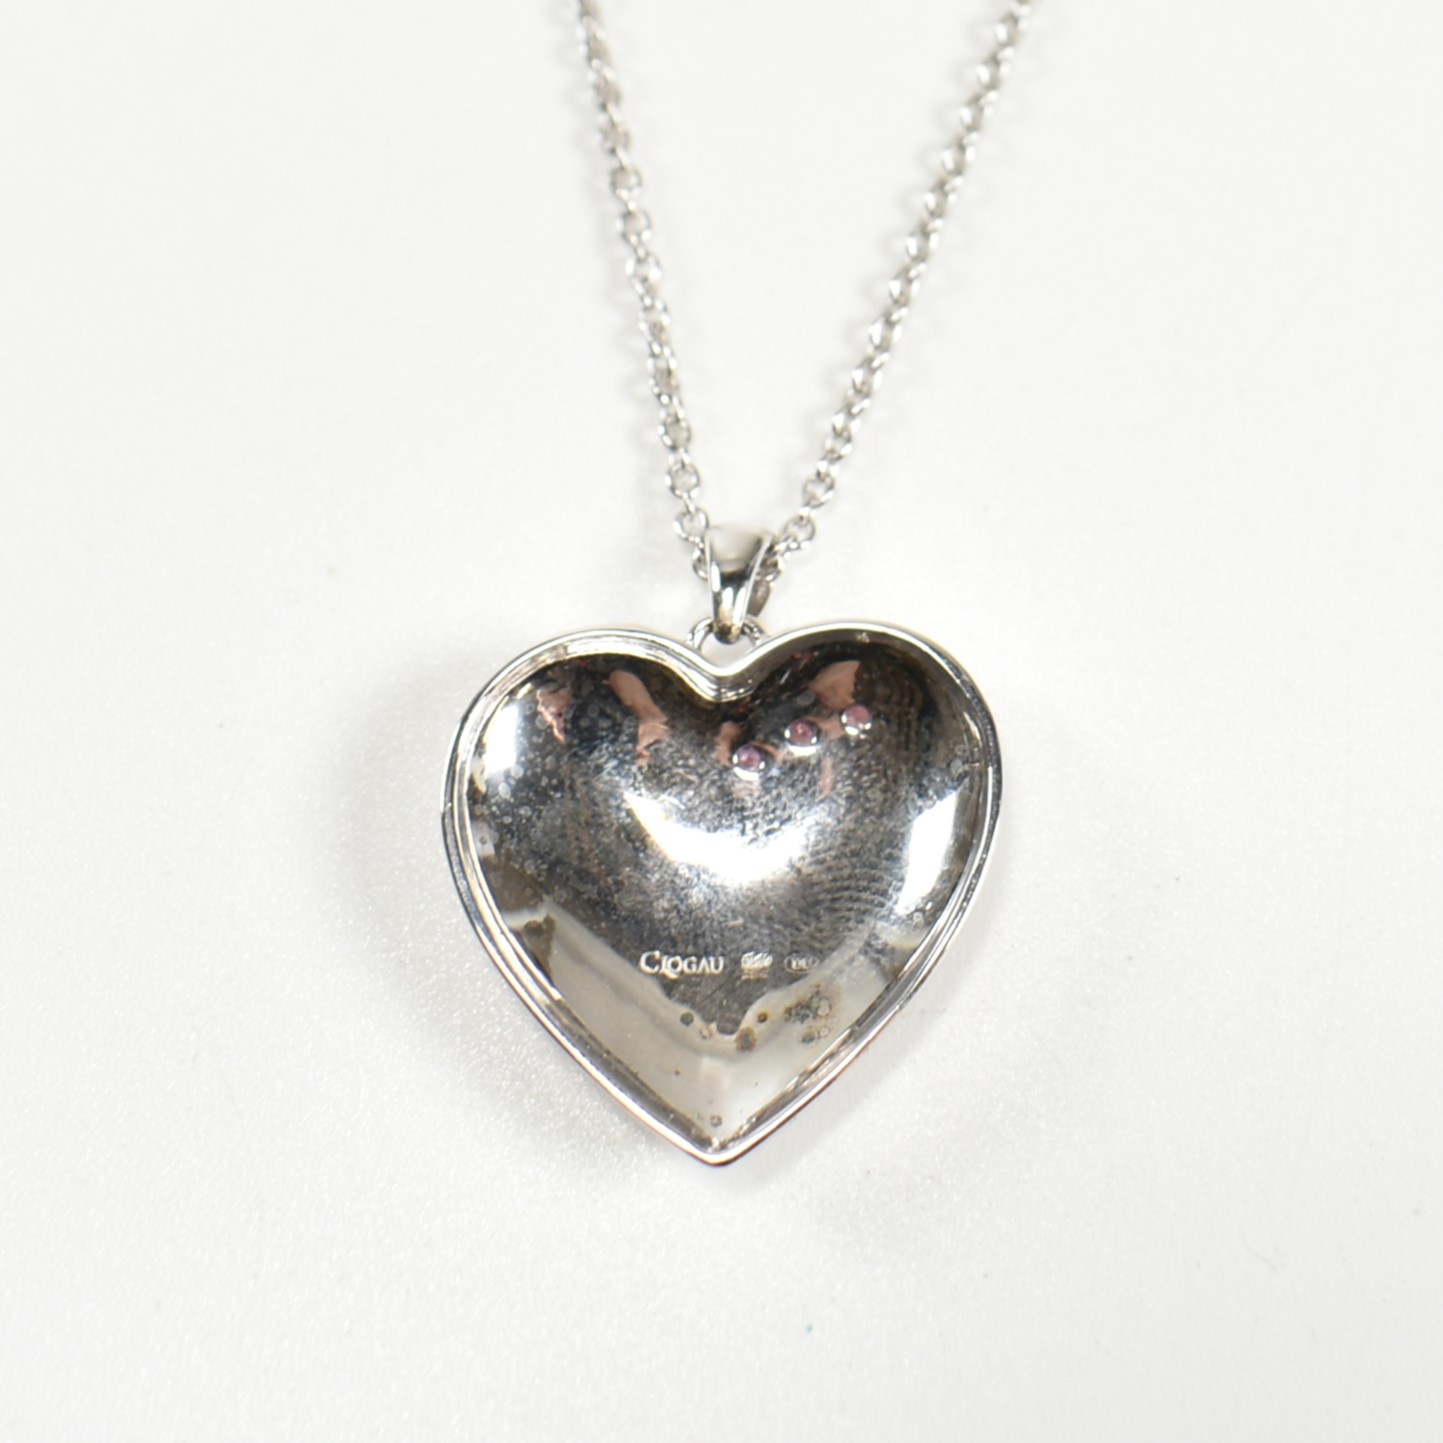 HALLMARKED SILVER CLOGAU CELTIC HEART PENDANT NECKLACE - Image 3 of 6